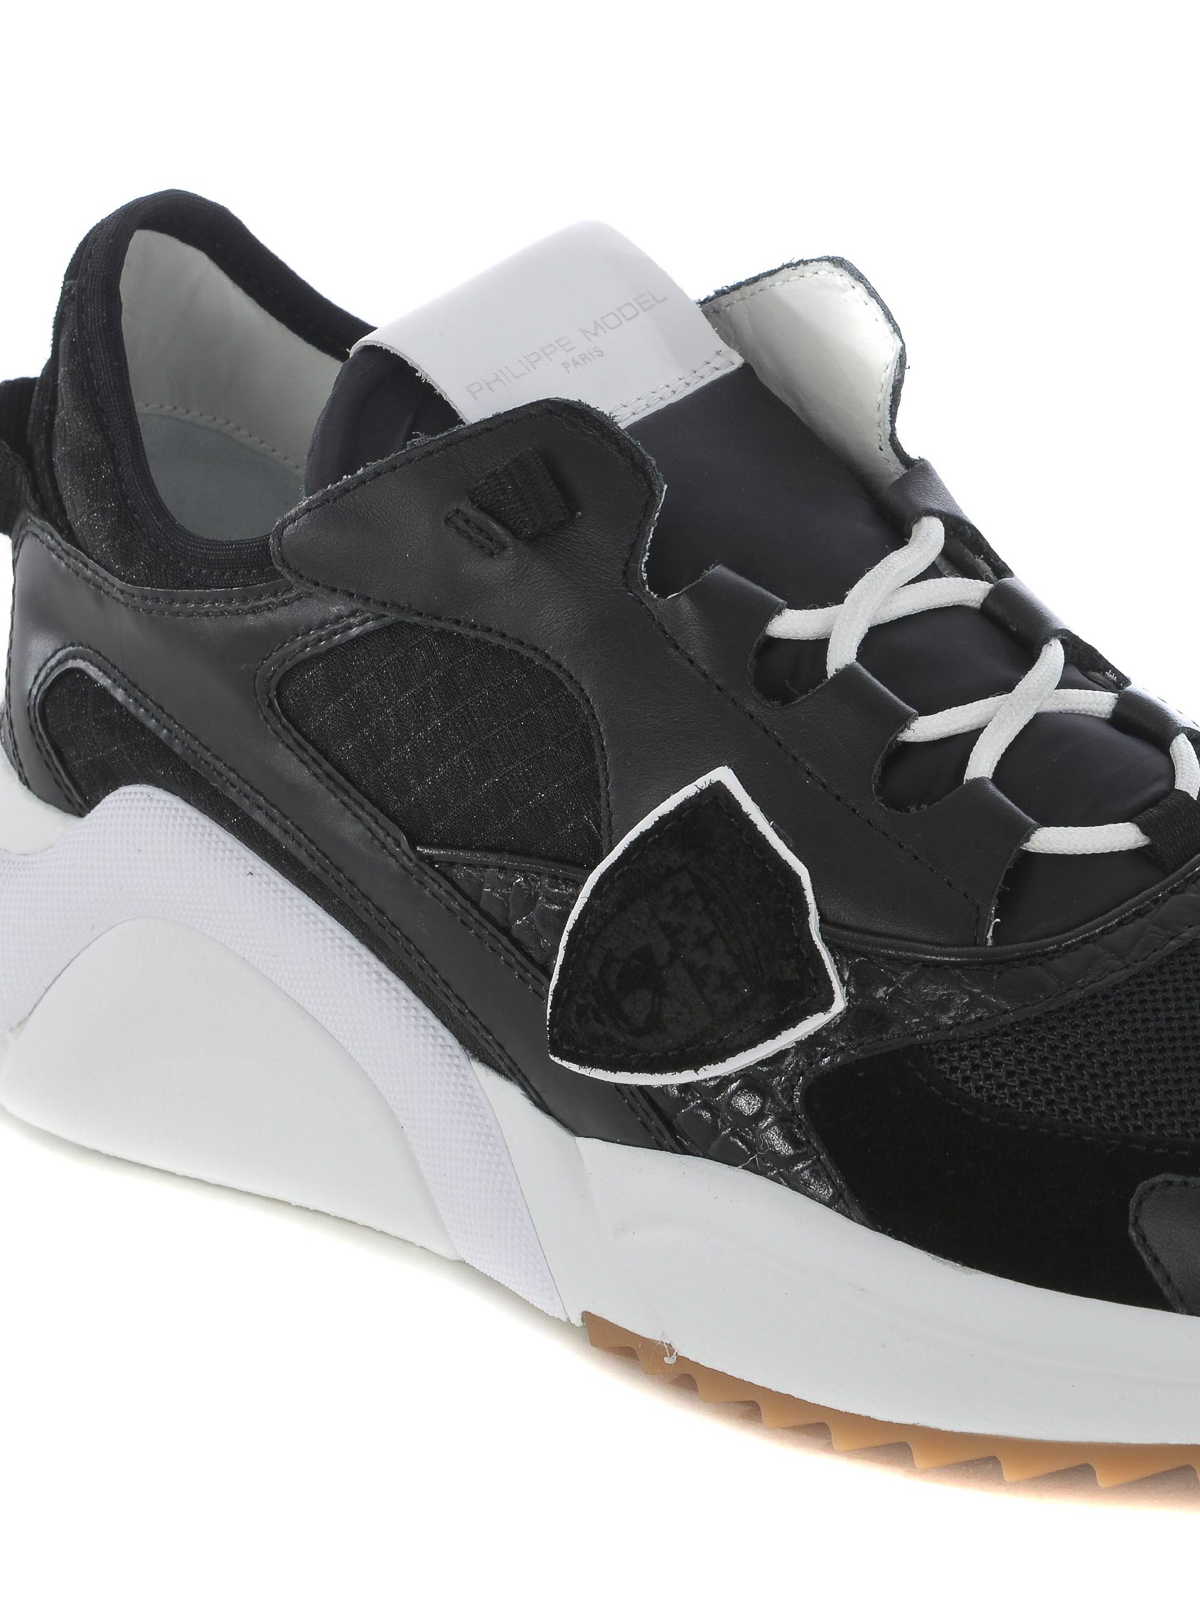 Trainers Philippe Model - Eze sneakers - EZLUWC04 | Shop online at iKRIX